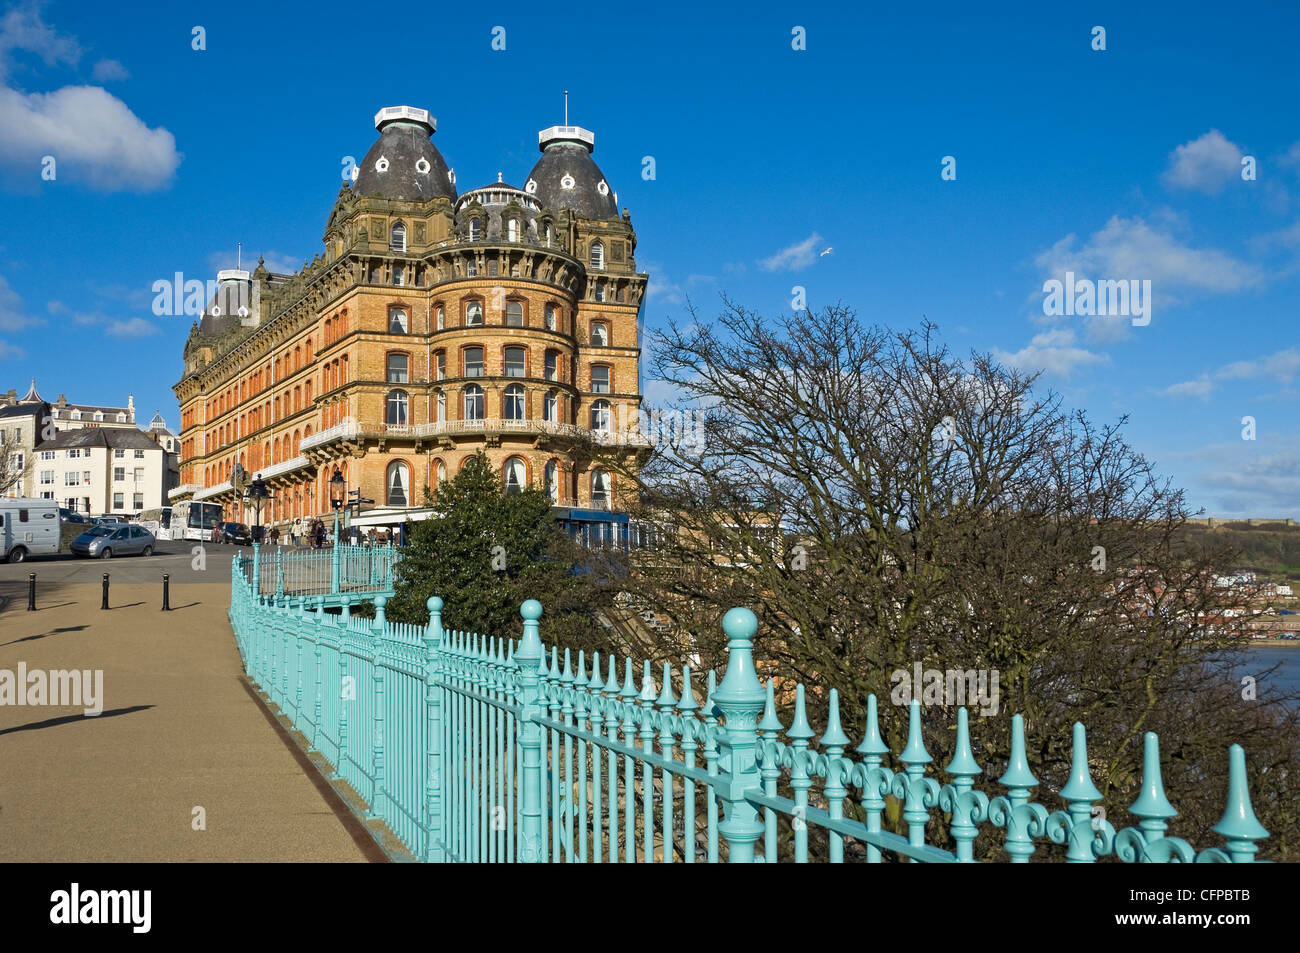 Grand Hotel from the Spa Bridge in winter South Bay Scarborough North Yorkshire England UK United Kingdom GB Great Britain Stock Photo